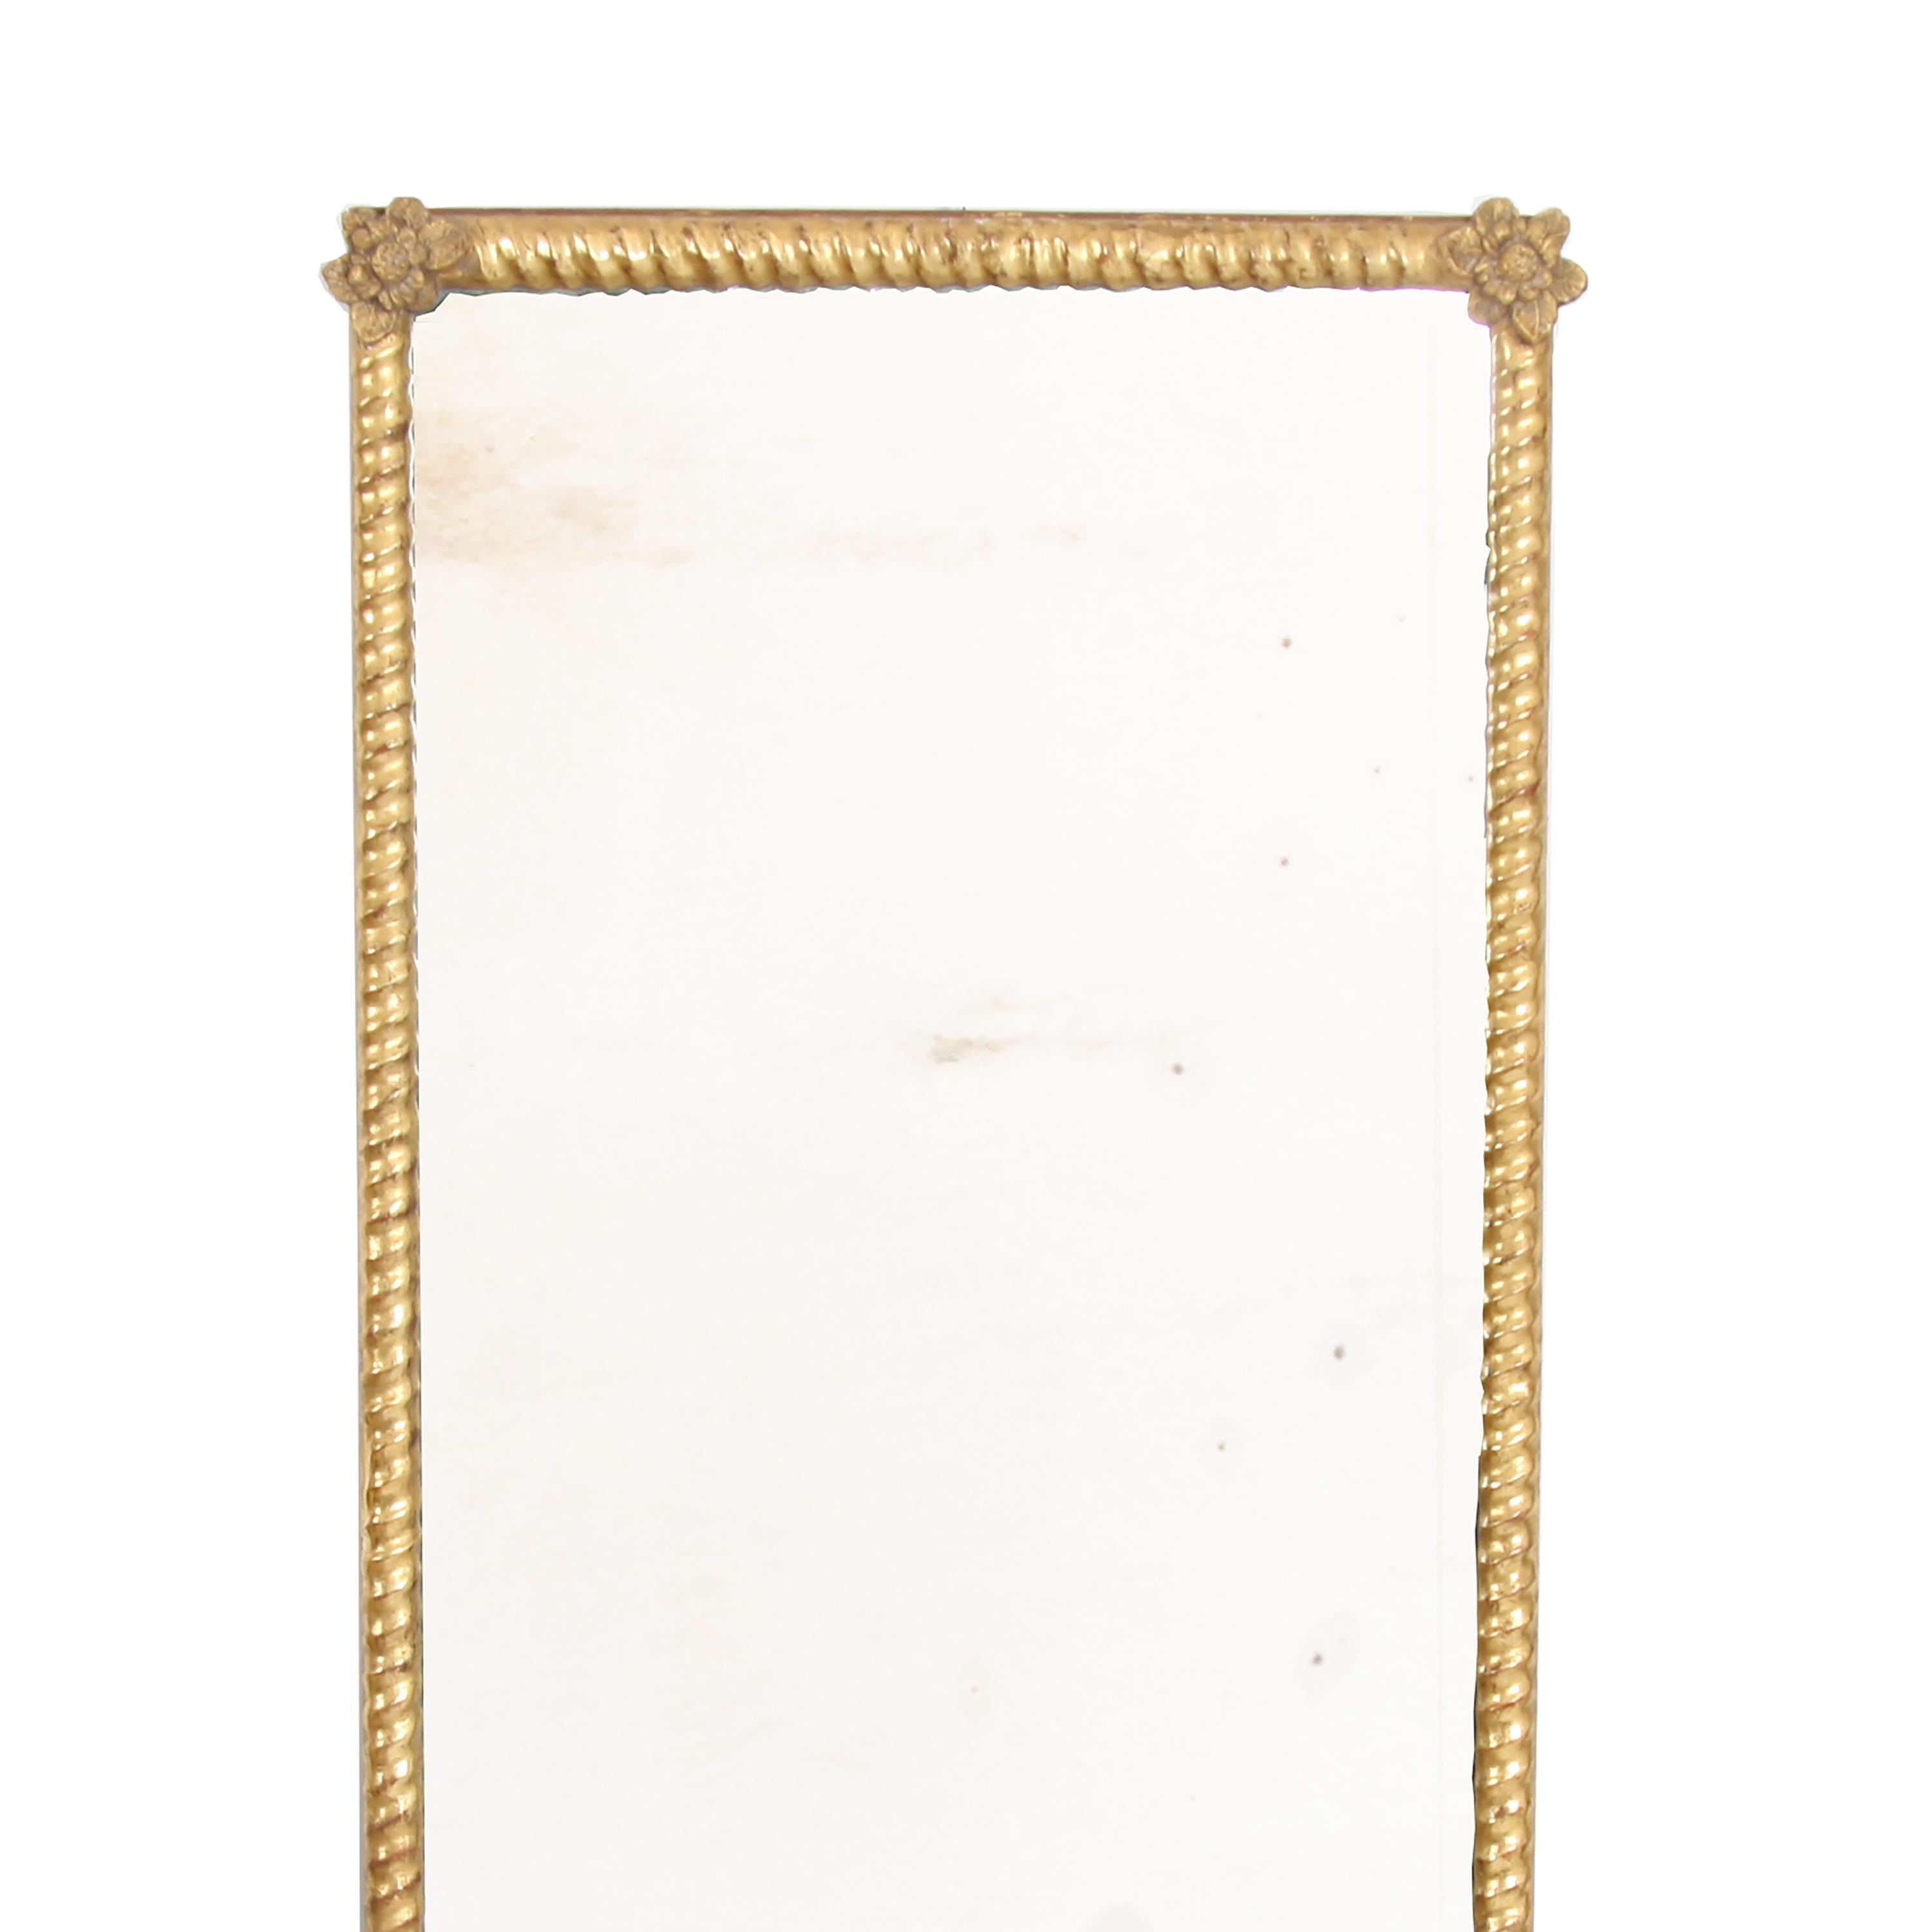 French 19th century giltwood mirror with a rope twist profile and moulded flowers to the corners. Beautiful sparkly, original mercury plate.